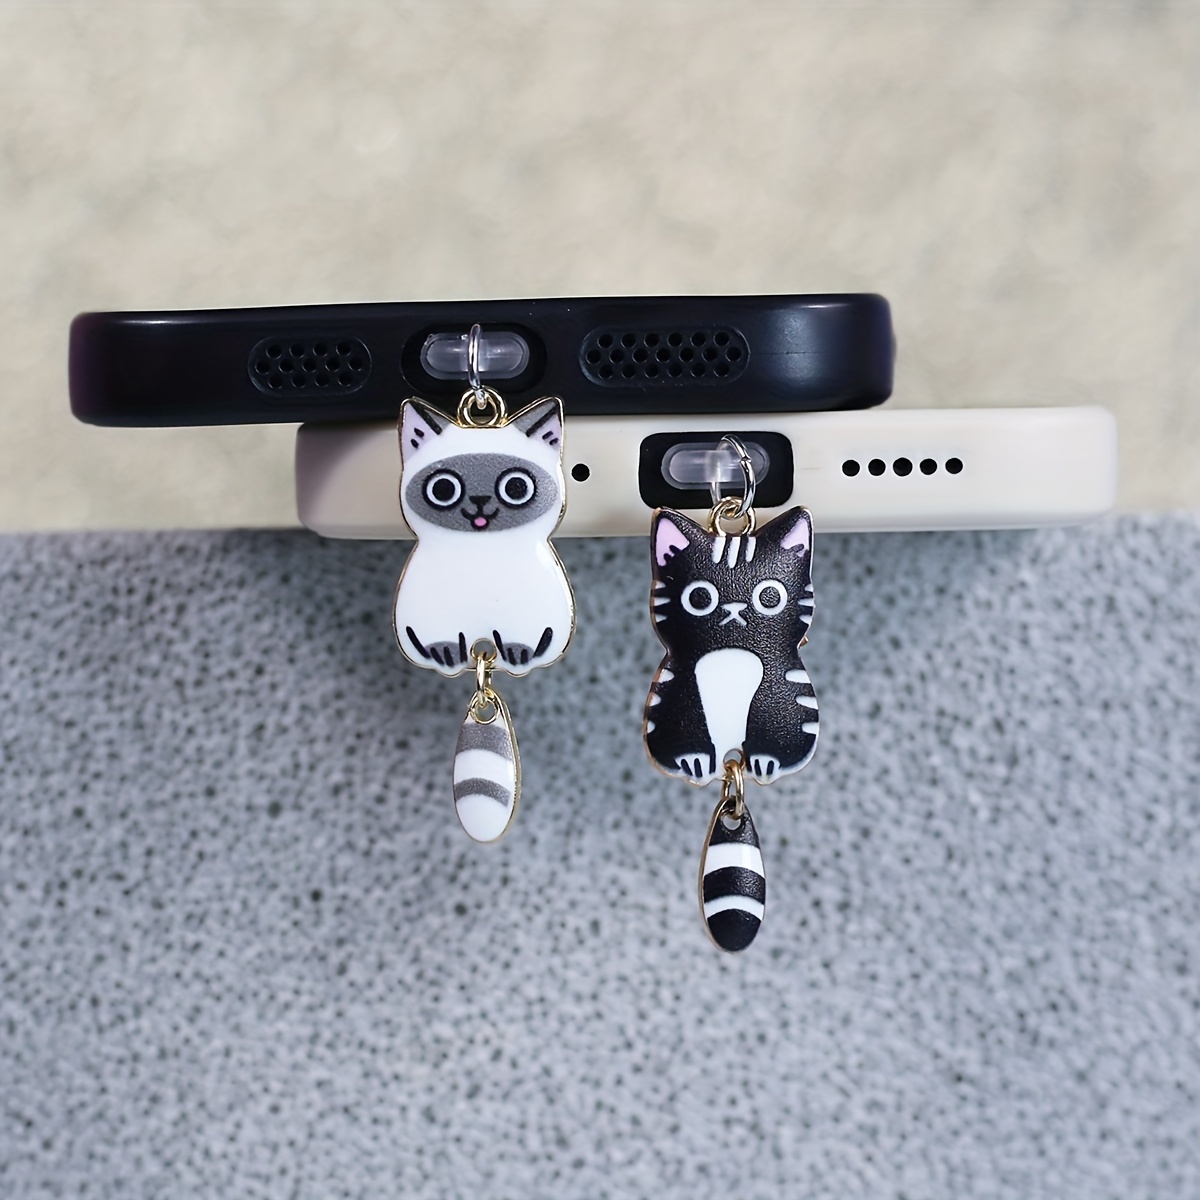 

Adorable Siamese Kitty Charm With Tail, Black And White, Phone Dust Plug Decorative Accessory For Iphone, Samsung, Type-c Charging Ports